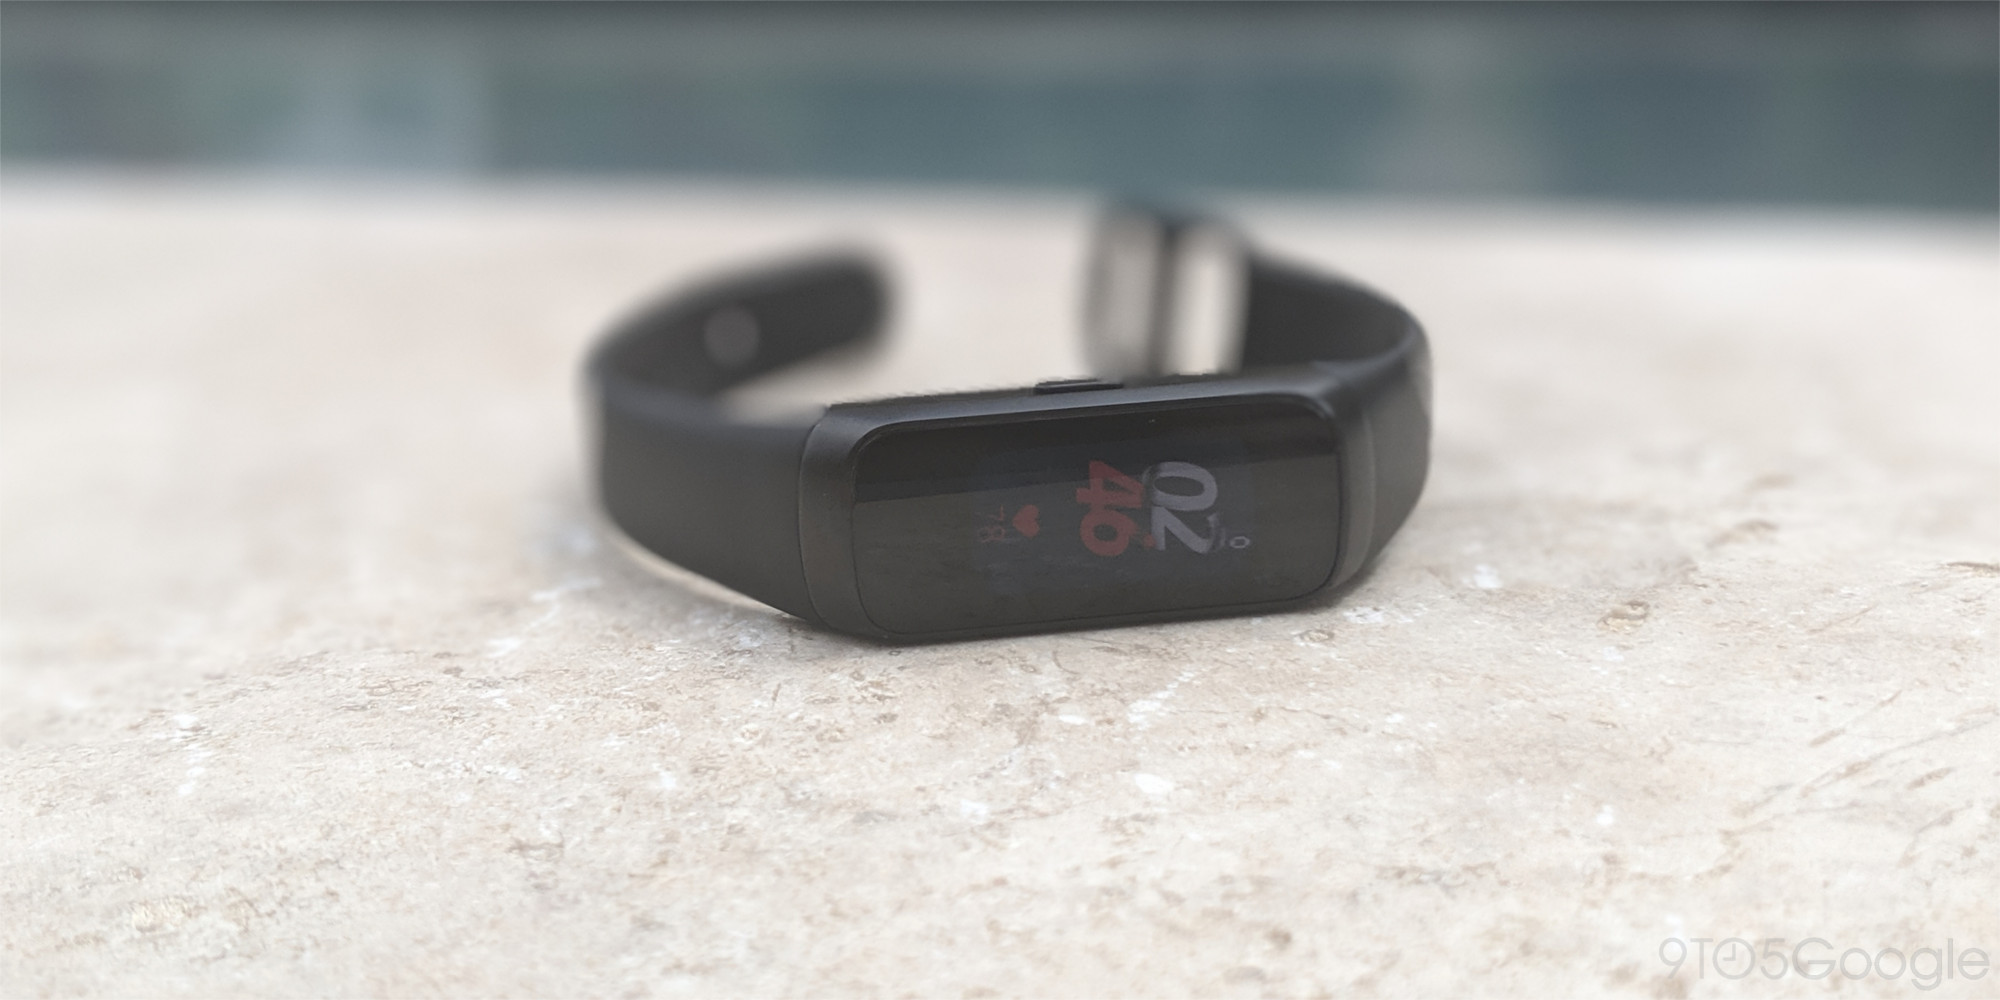 galaxy fit fitness band